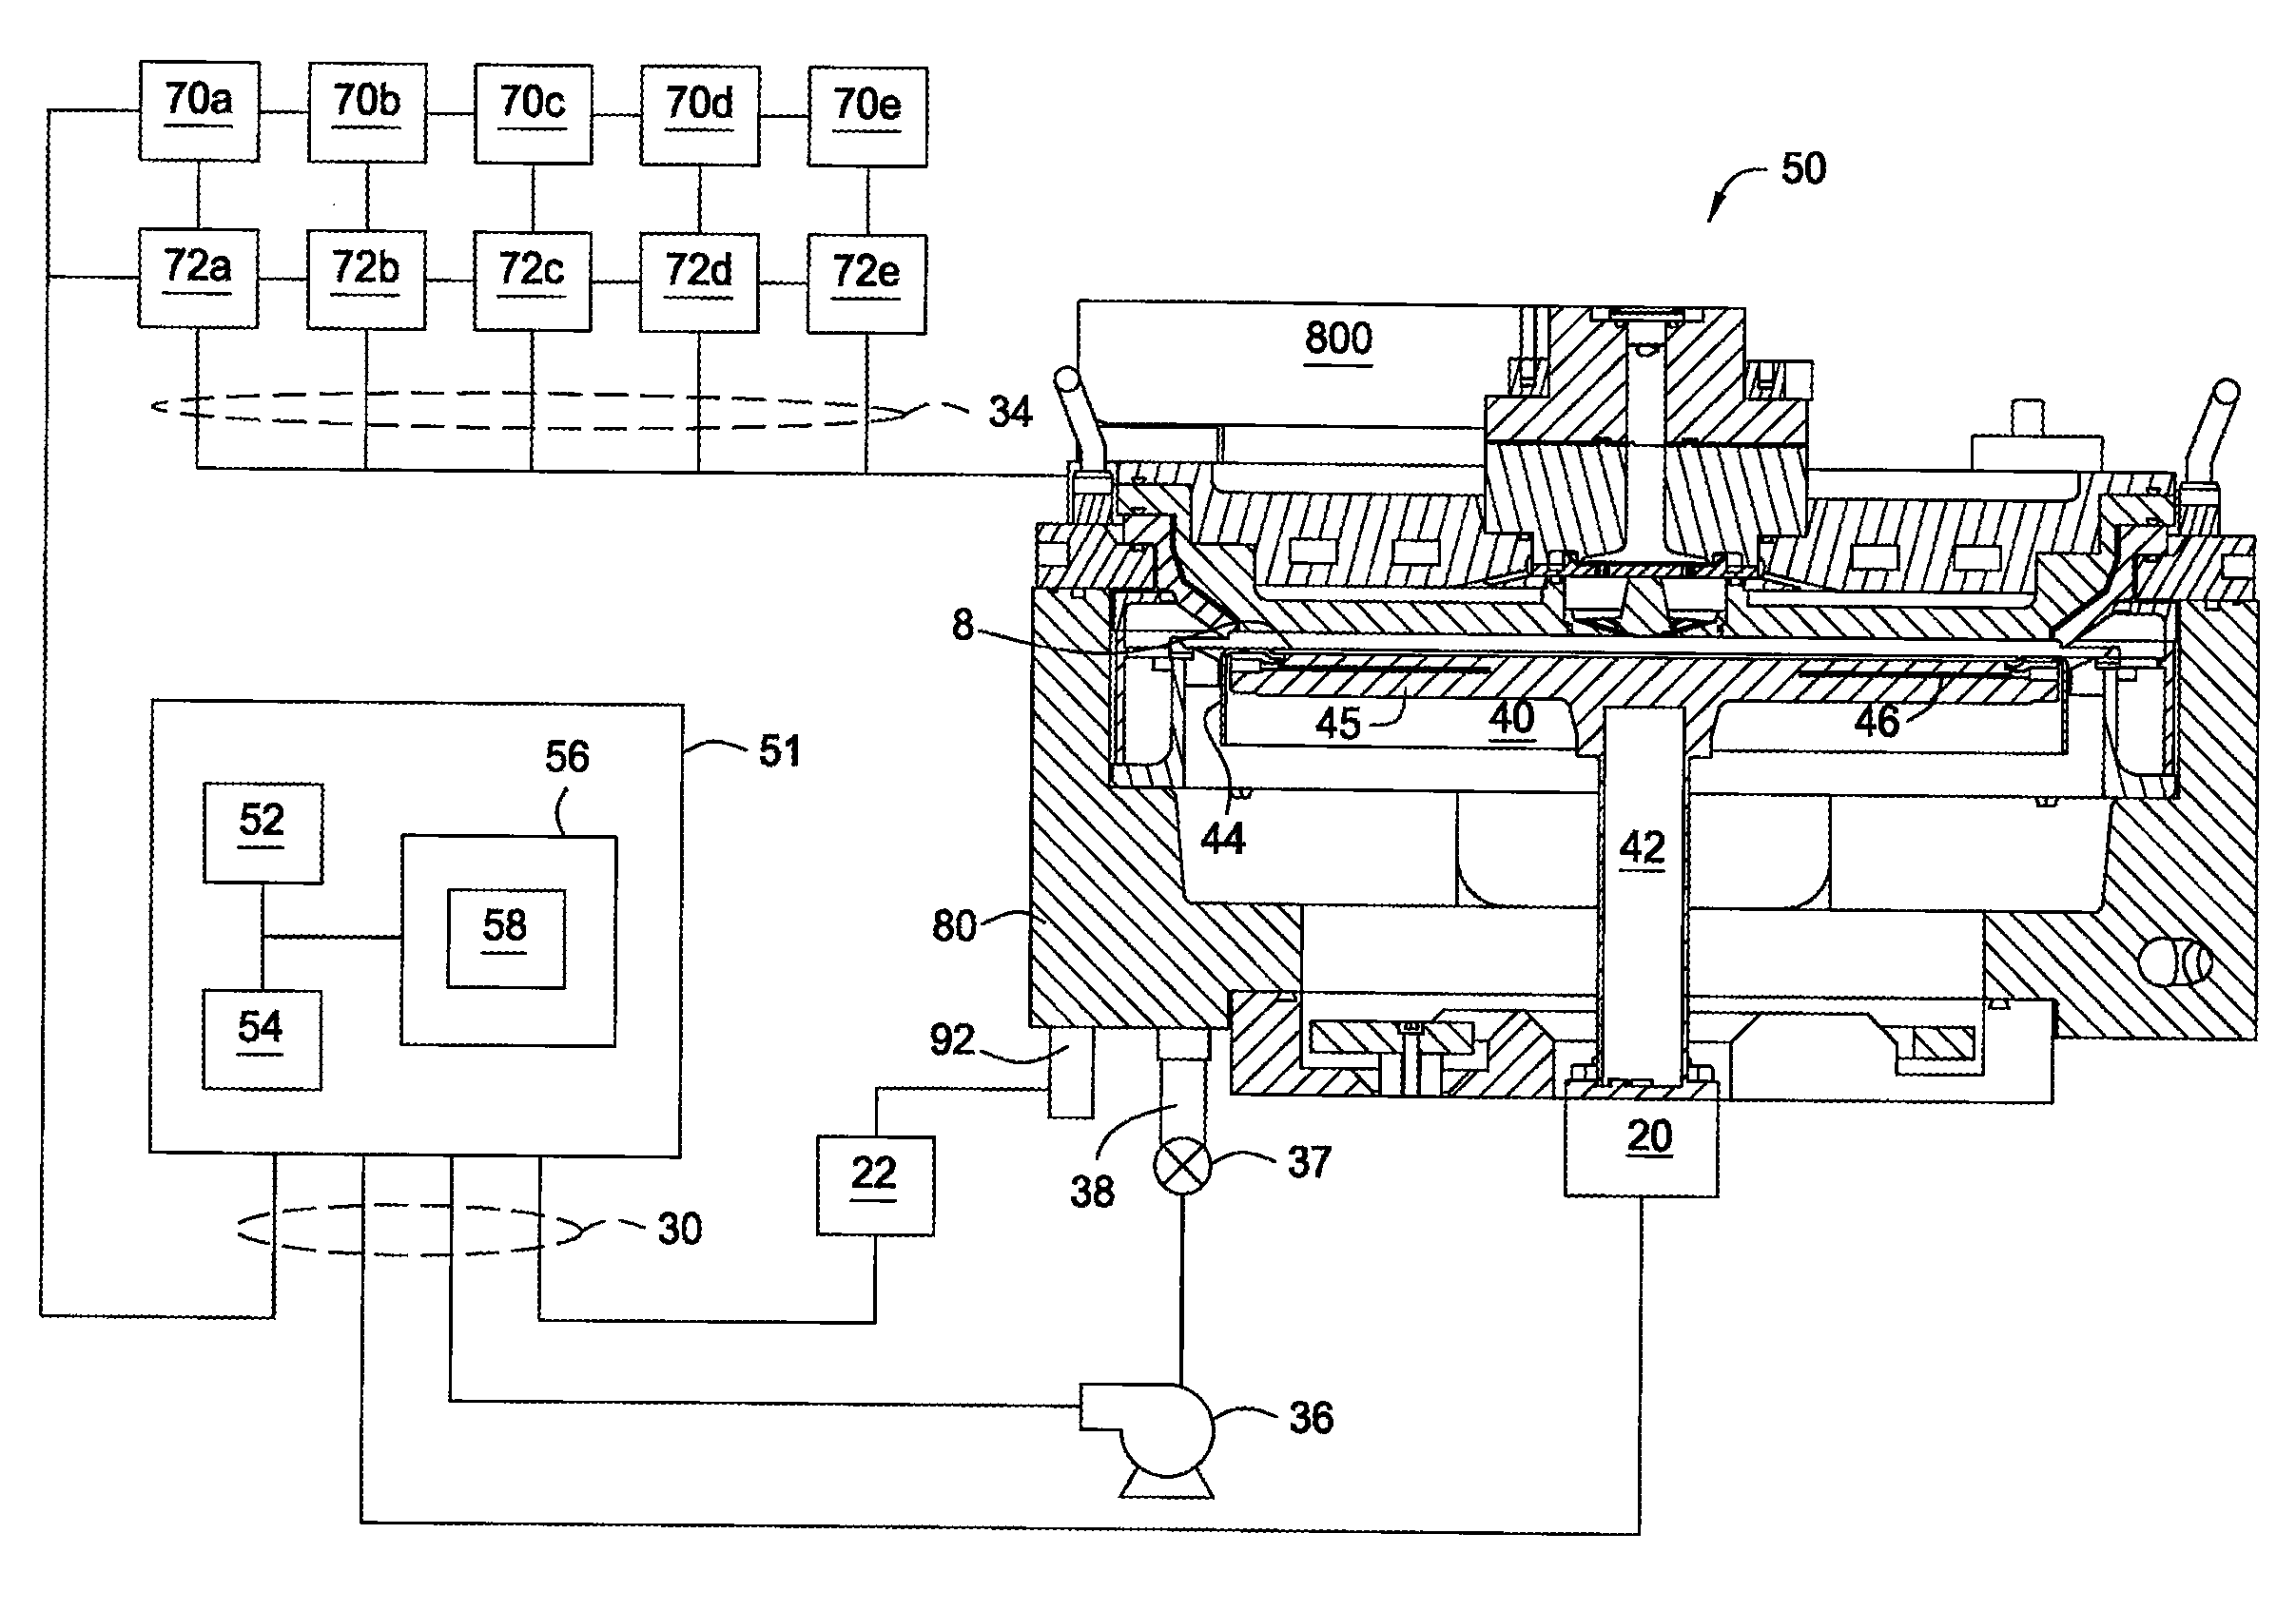 Apparatus and process for plasma-enhanced atomic layer deposition